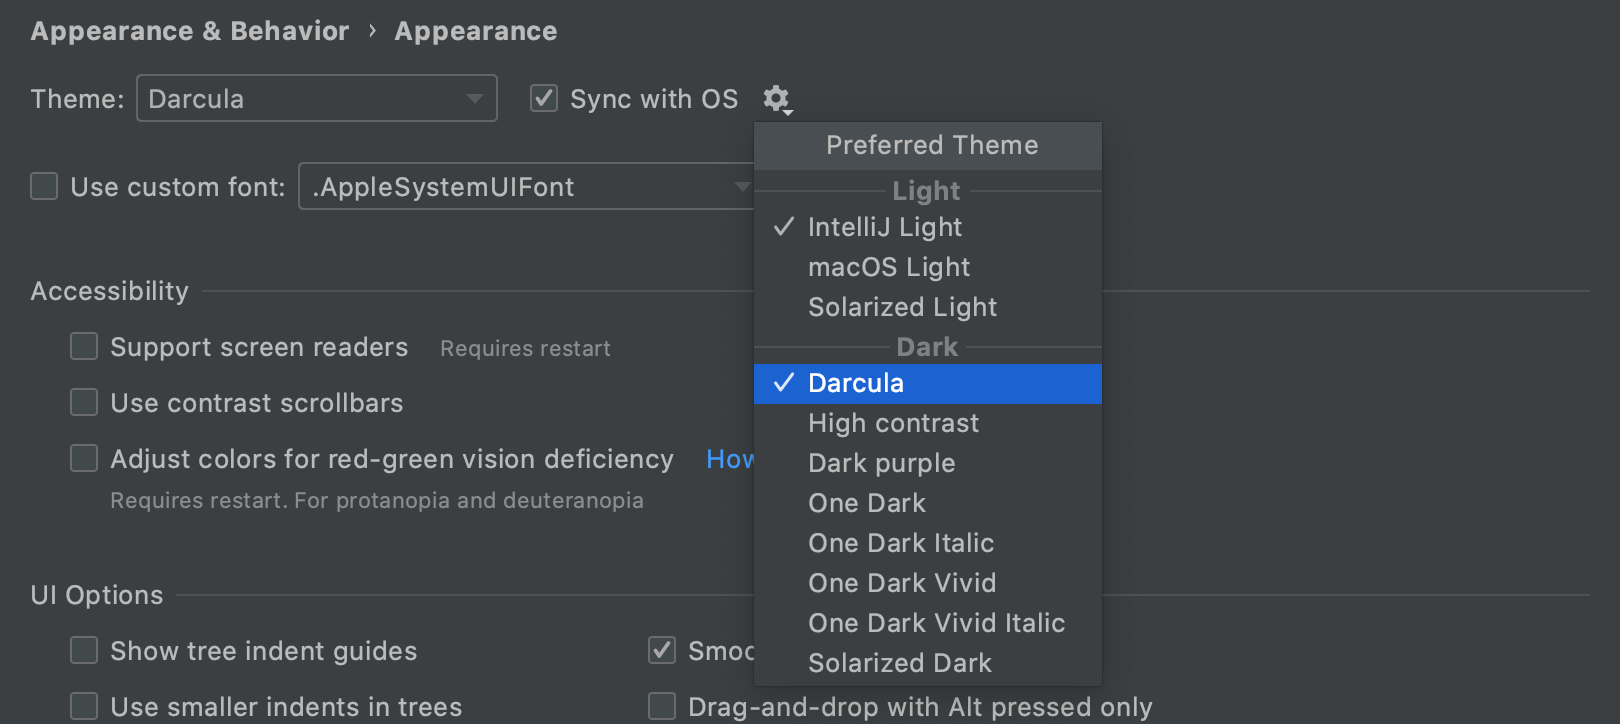 IDE theme synced with OS settings